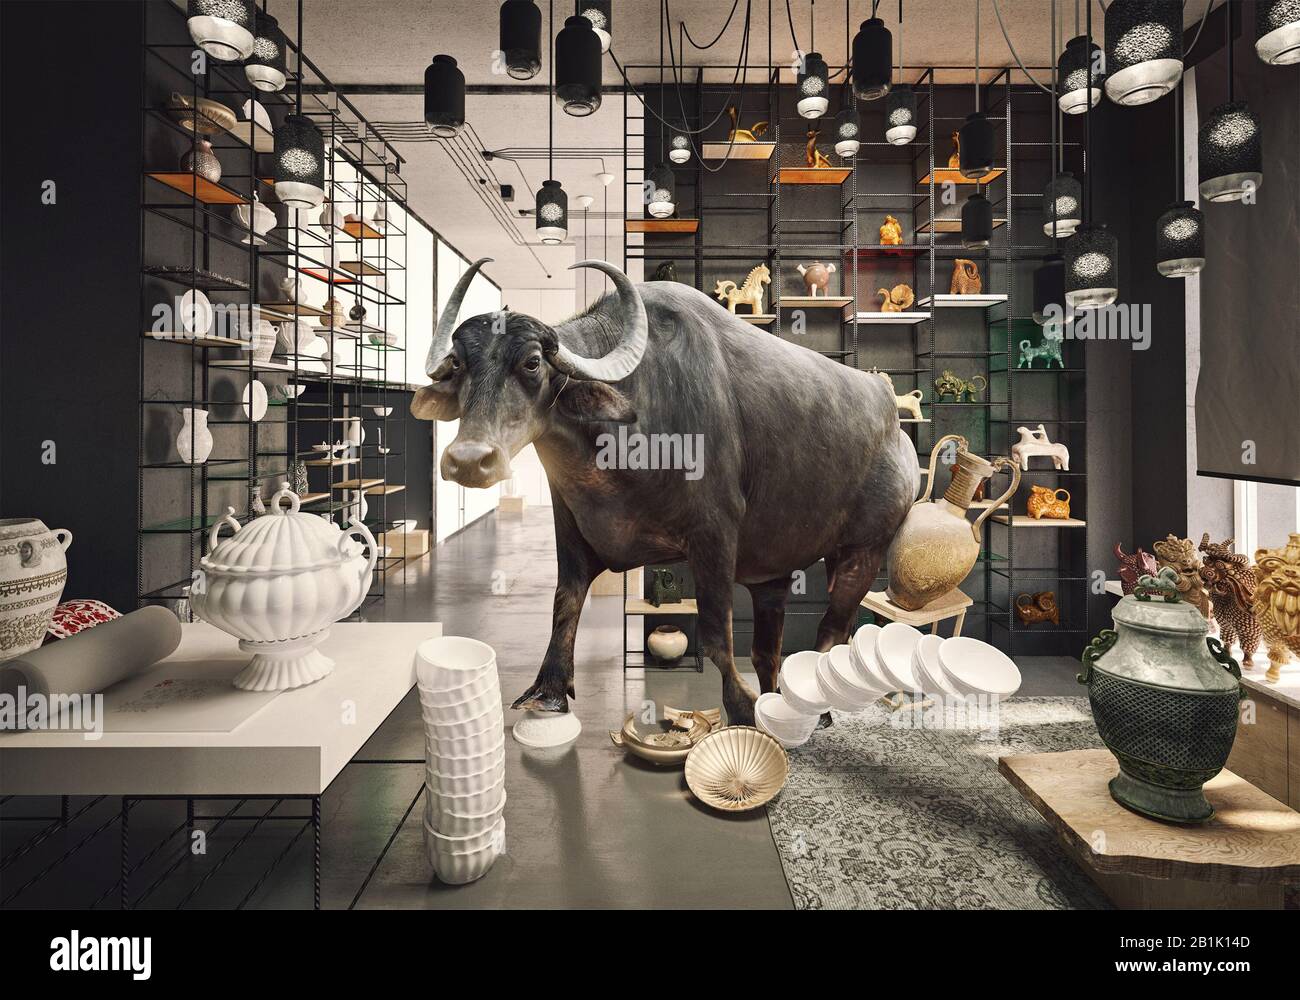 bull in a China shop. Photo and media mixed creative concept Stock Photo